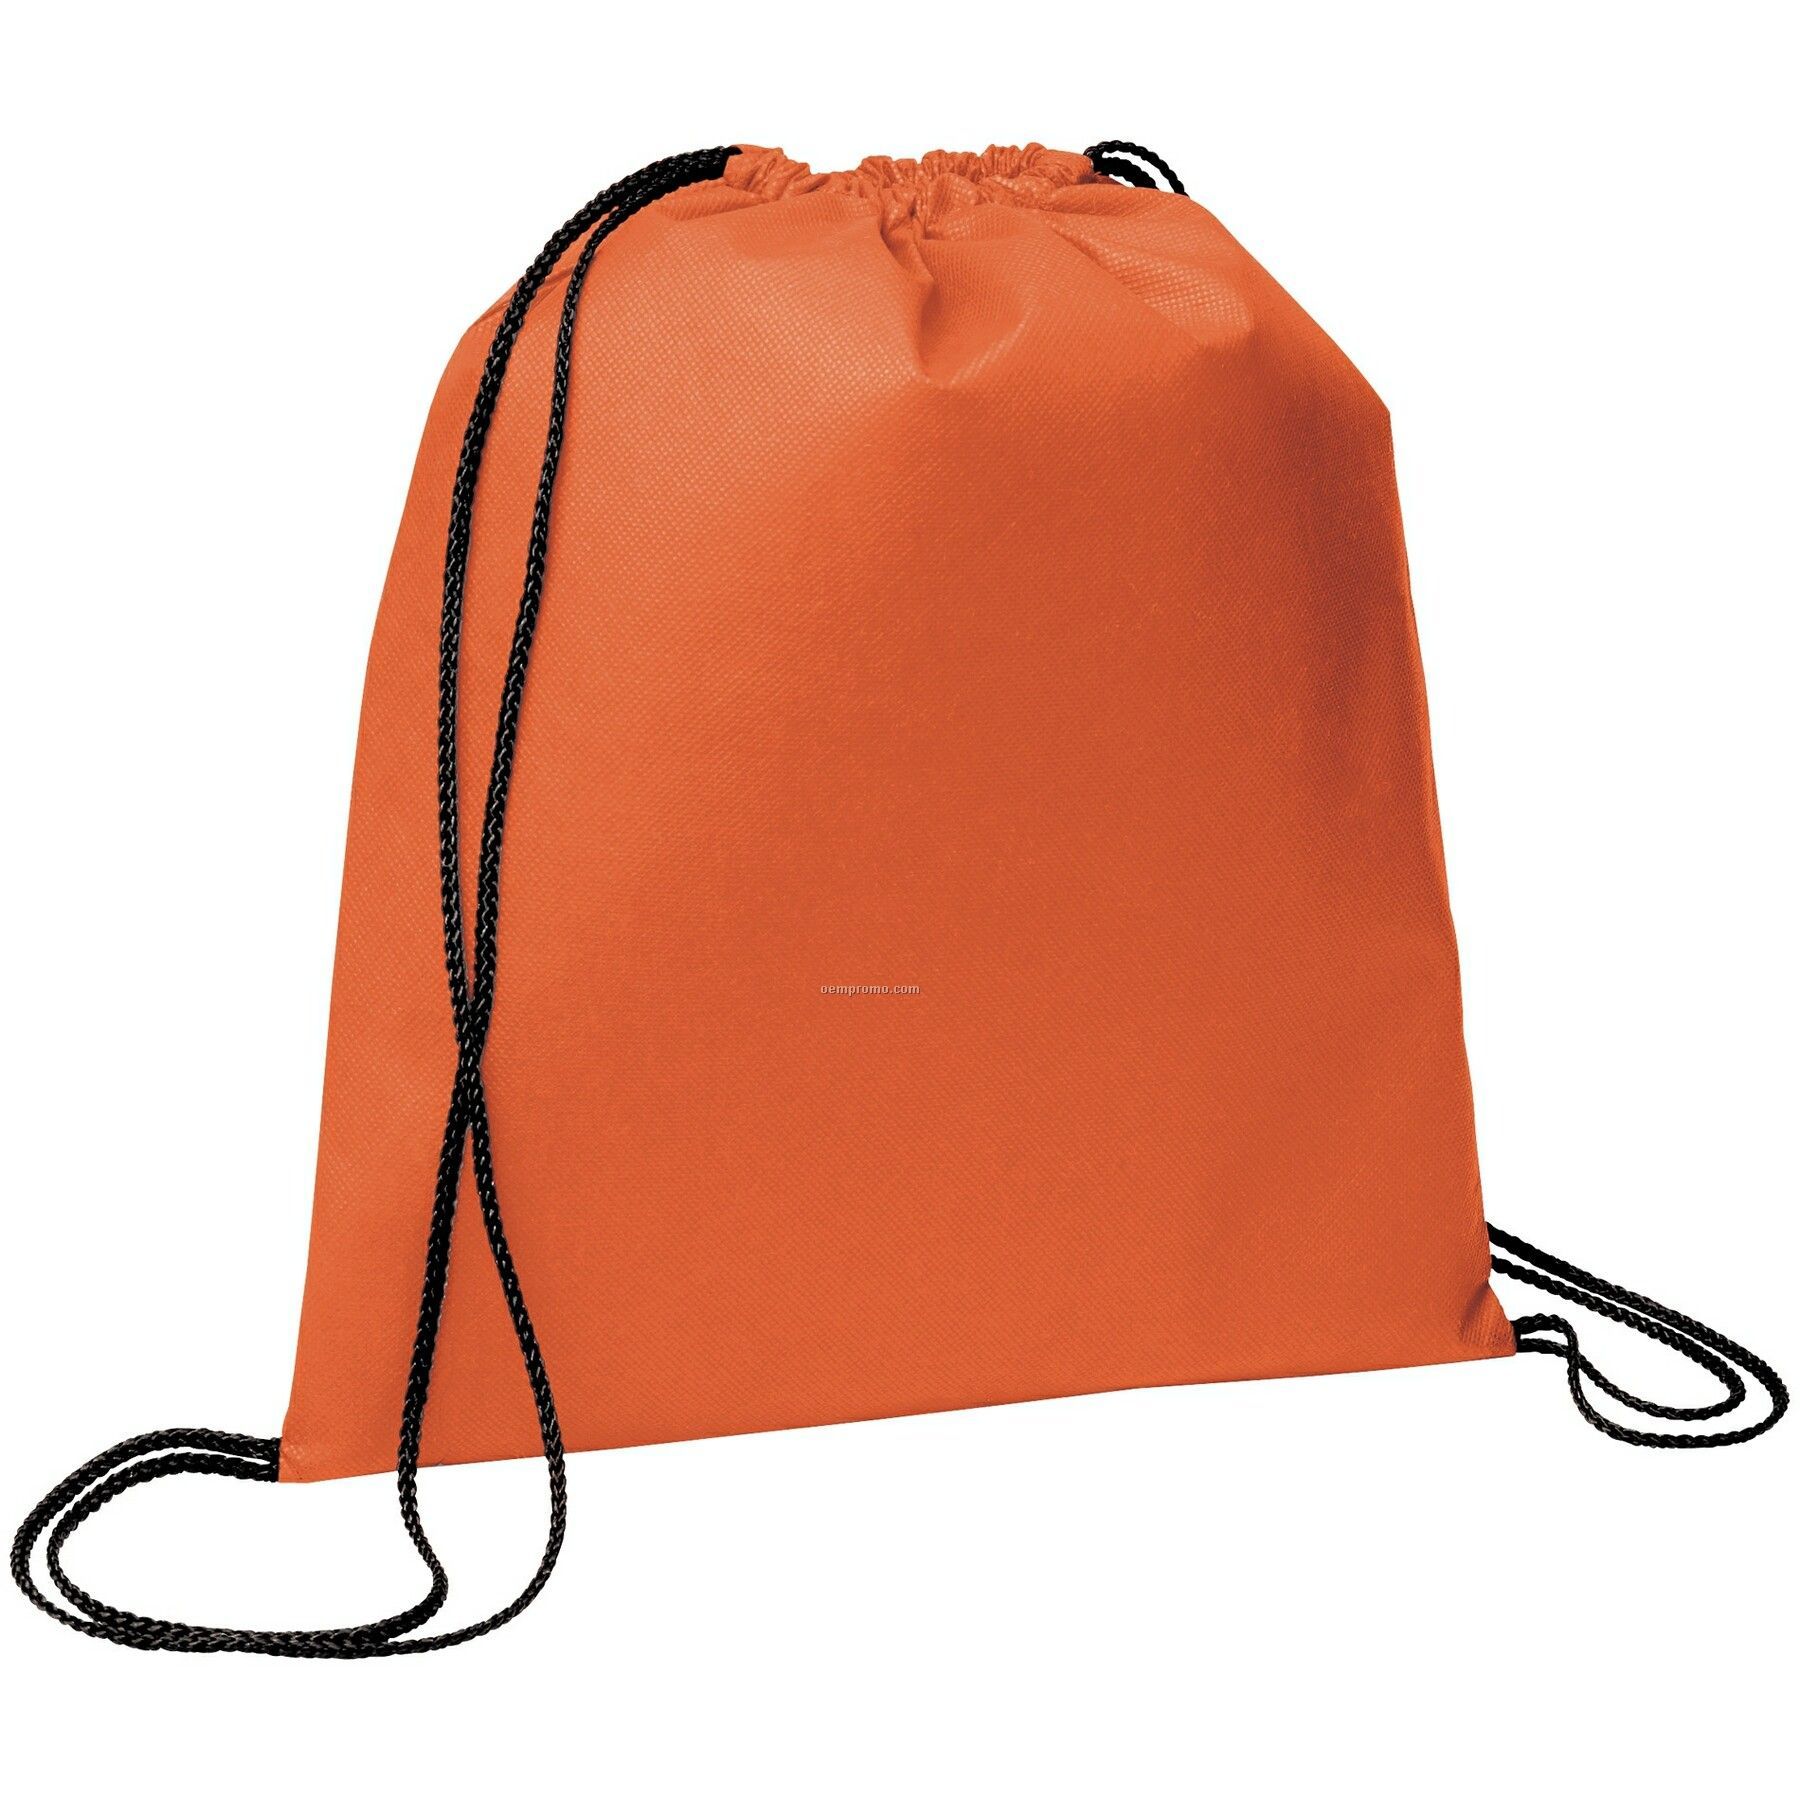 The Evergreen Drawstring Backpack